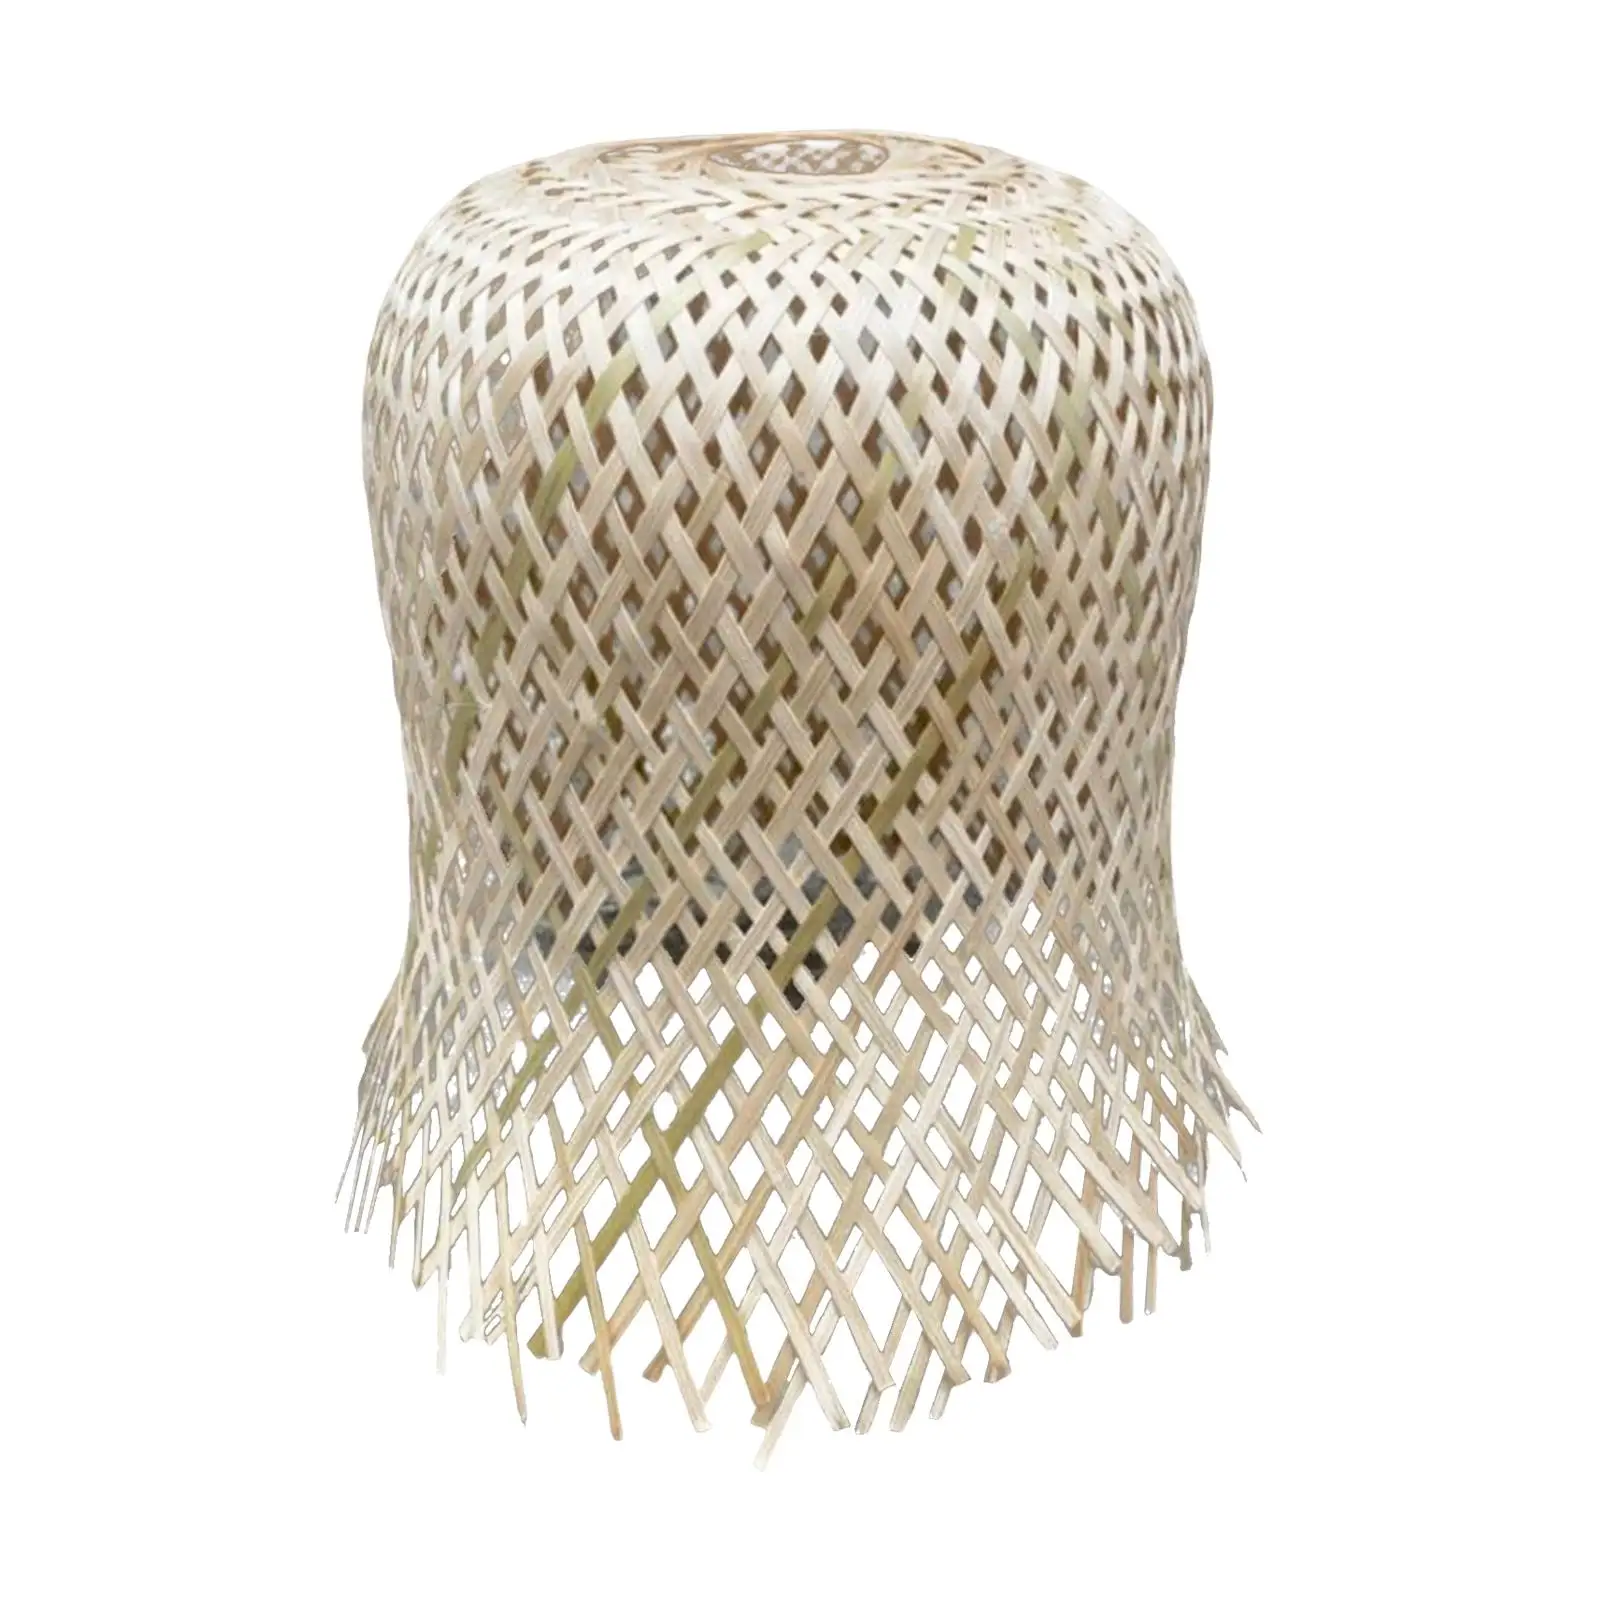 Pendant Light Cover Ceiling Light Fixture Hanging Decorative Handwoven Bamboo Lamp Shade for LED Lights Bedroom Dining Room Dorm